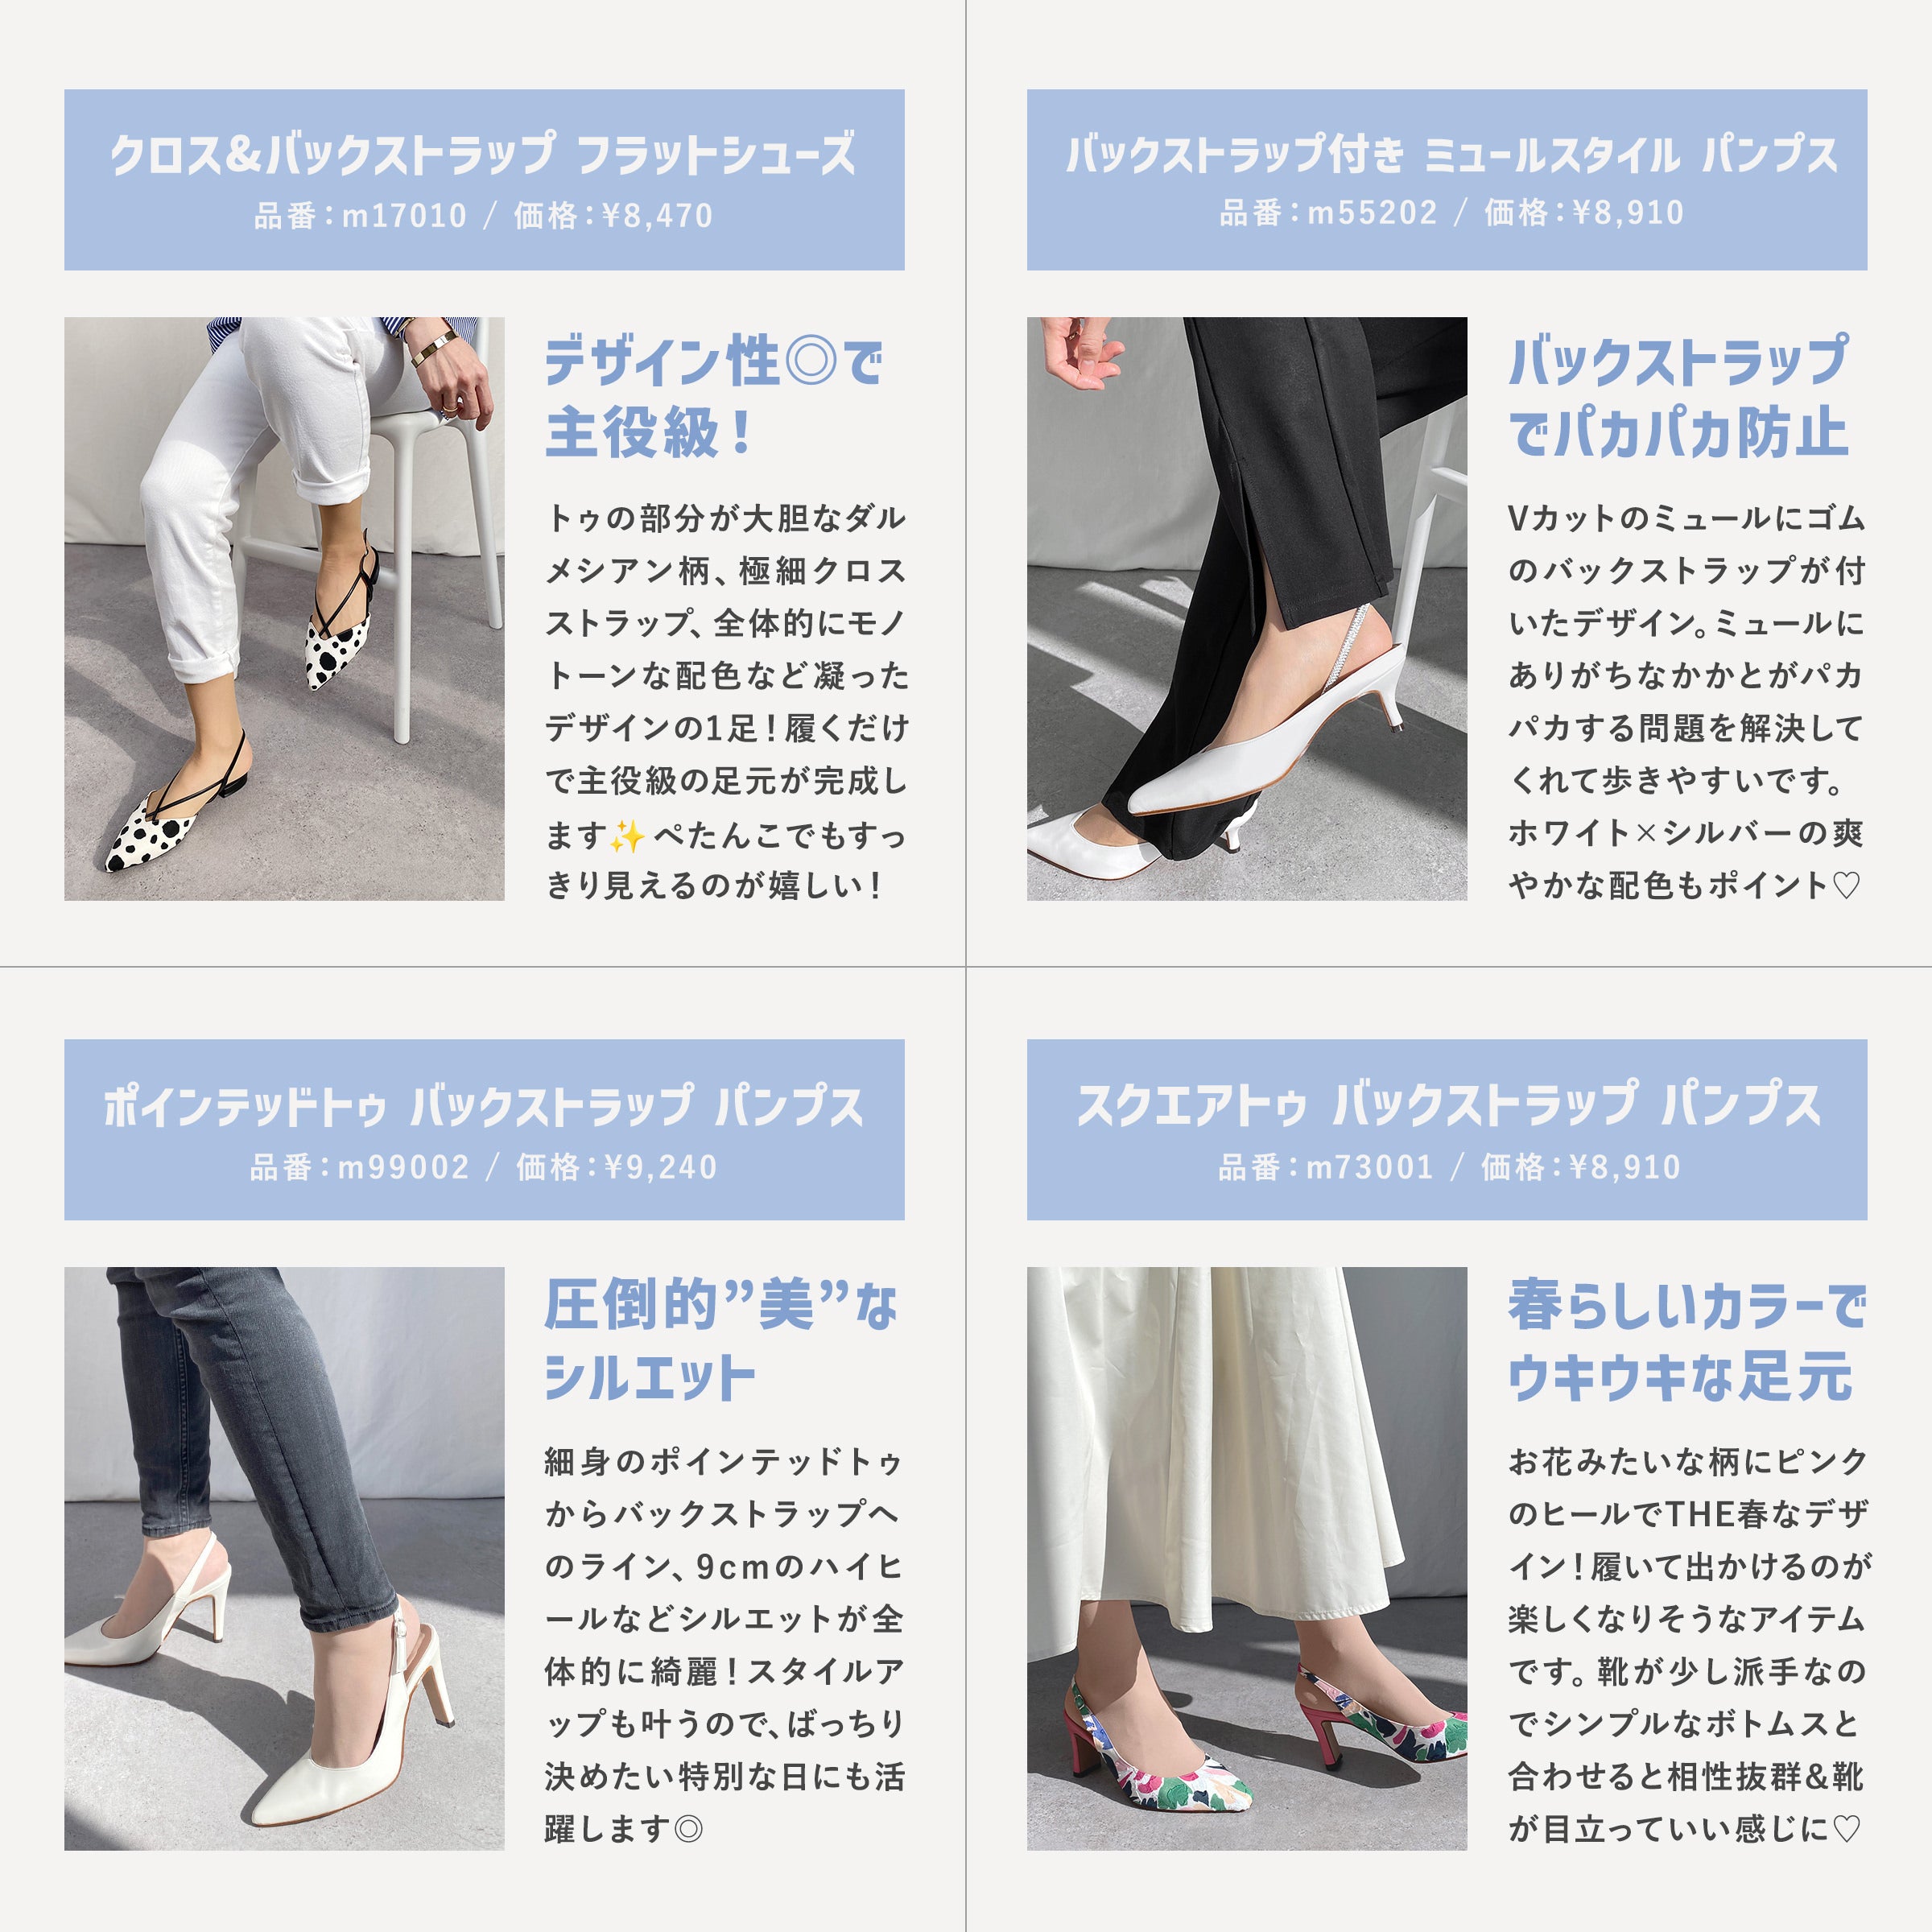 Strap pumps and flat shoes feature